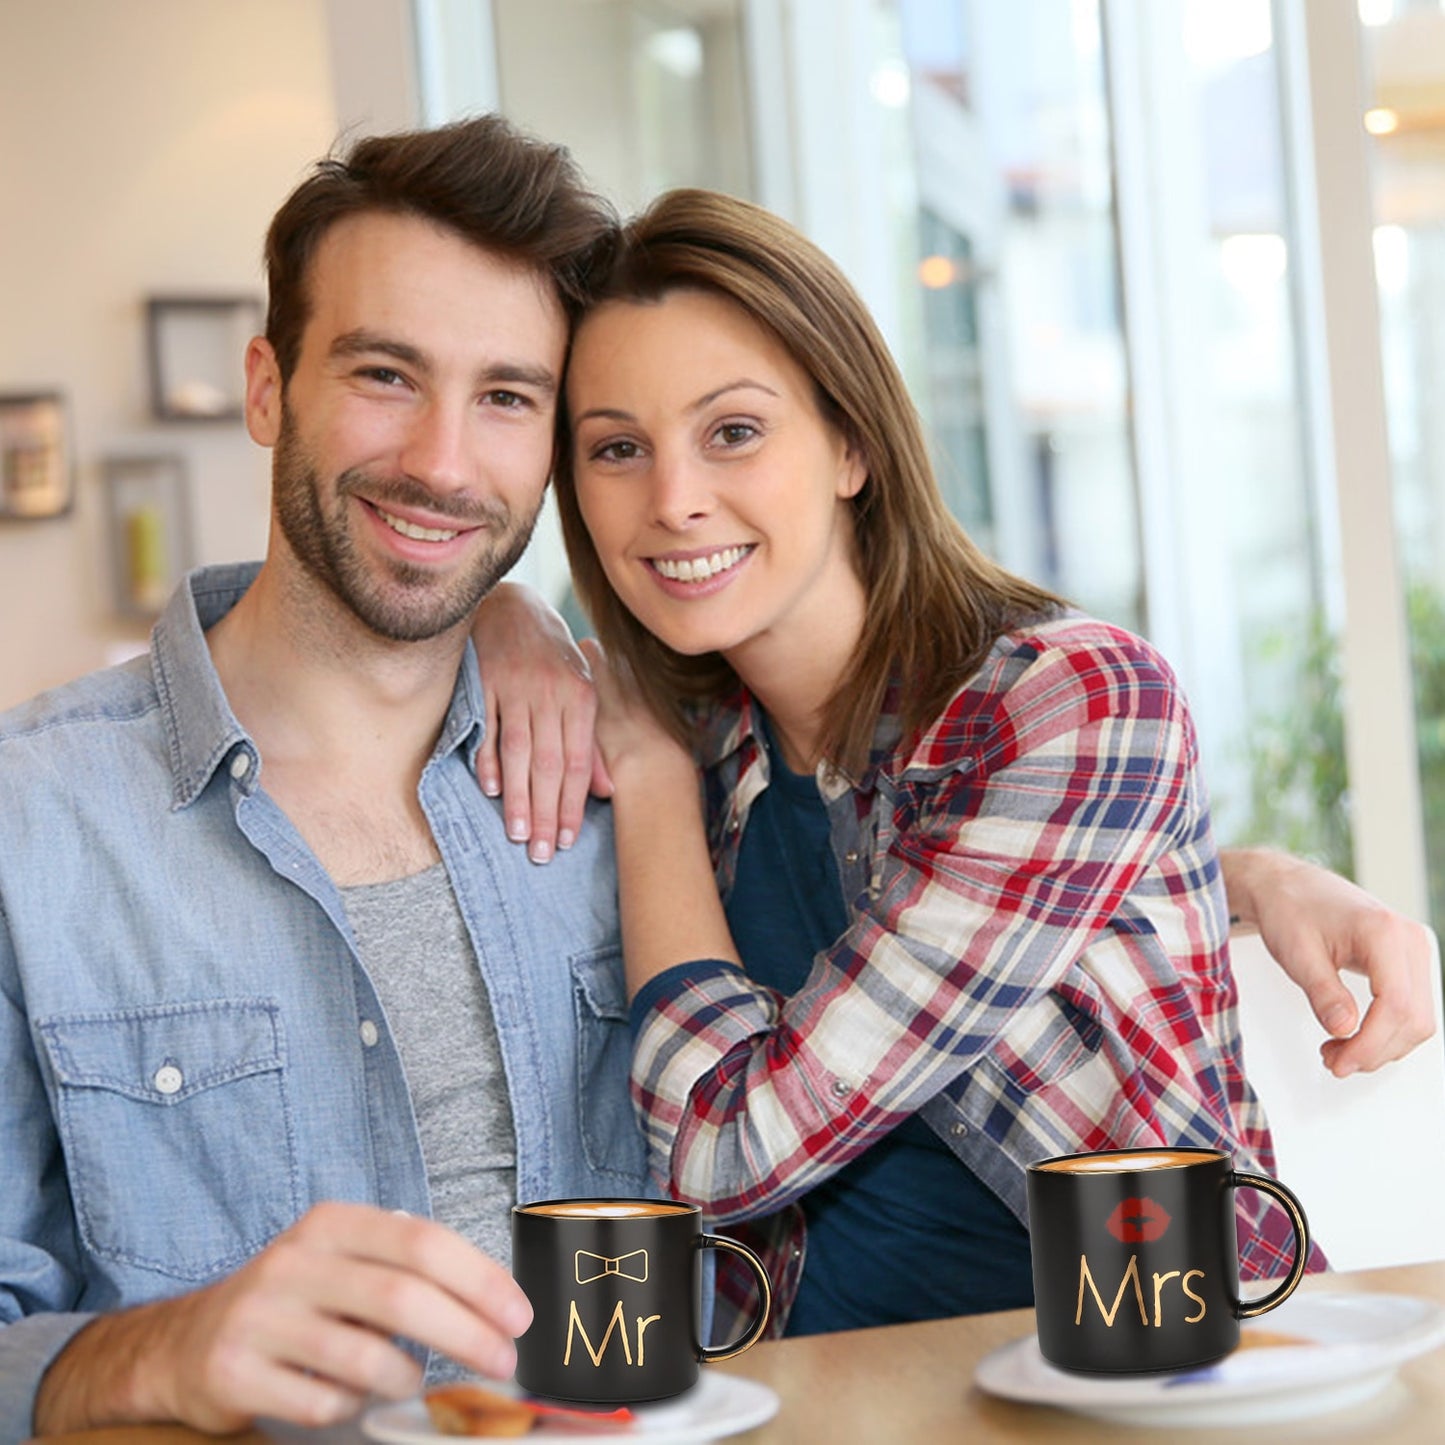 Mr and Mrs Coffee Mugs Creative Couples Black Ceramic Cups Wedding Gifts for Newlyweds Cup Set Perfect Gift-Set for Engagement - kmtell.com